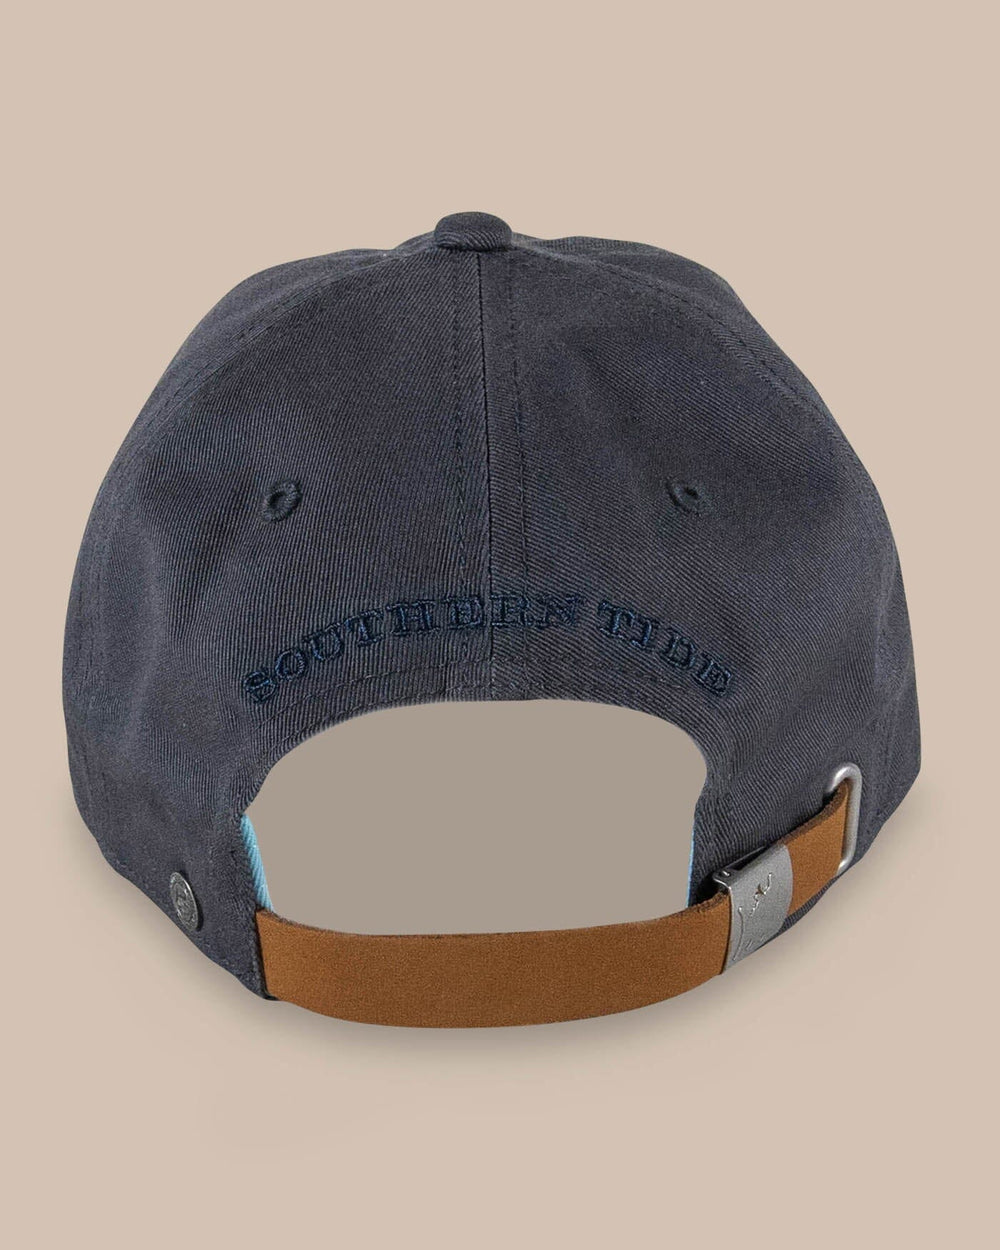 The back view of the Southern Tide Mini Skipjack Leather Strap Hat by Southern Tide - Charcoal